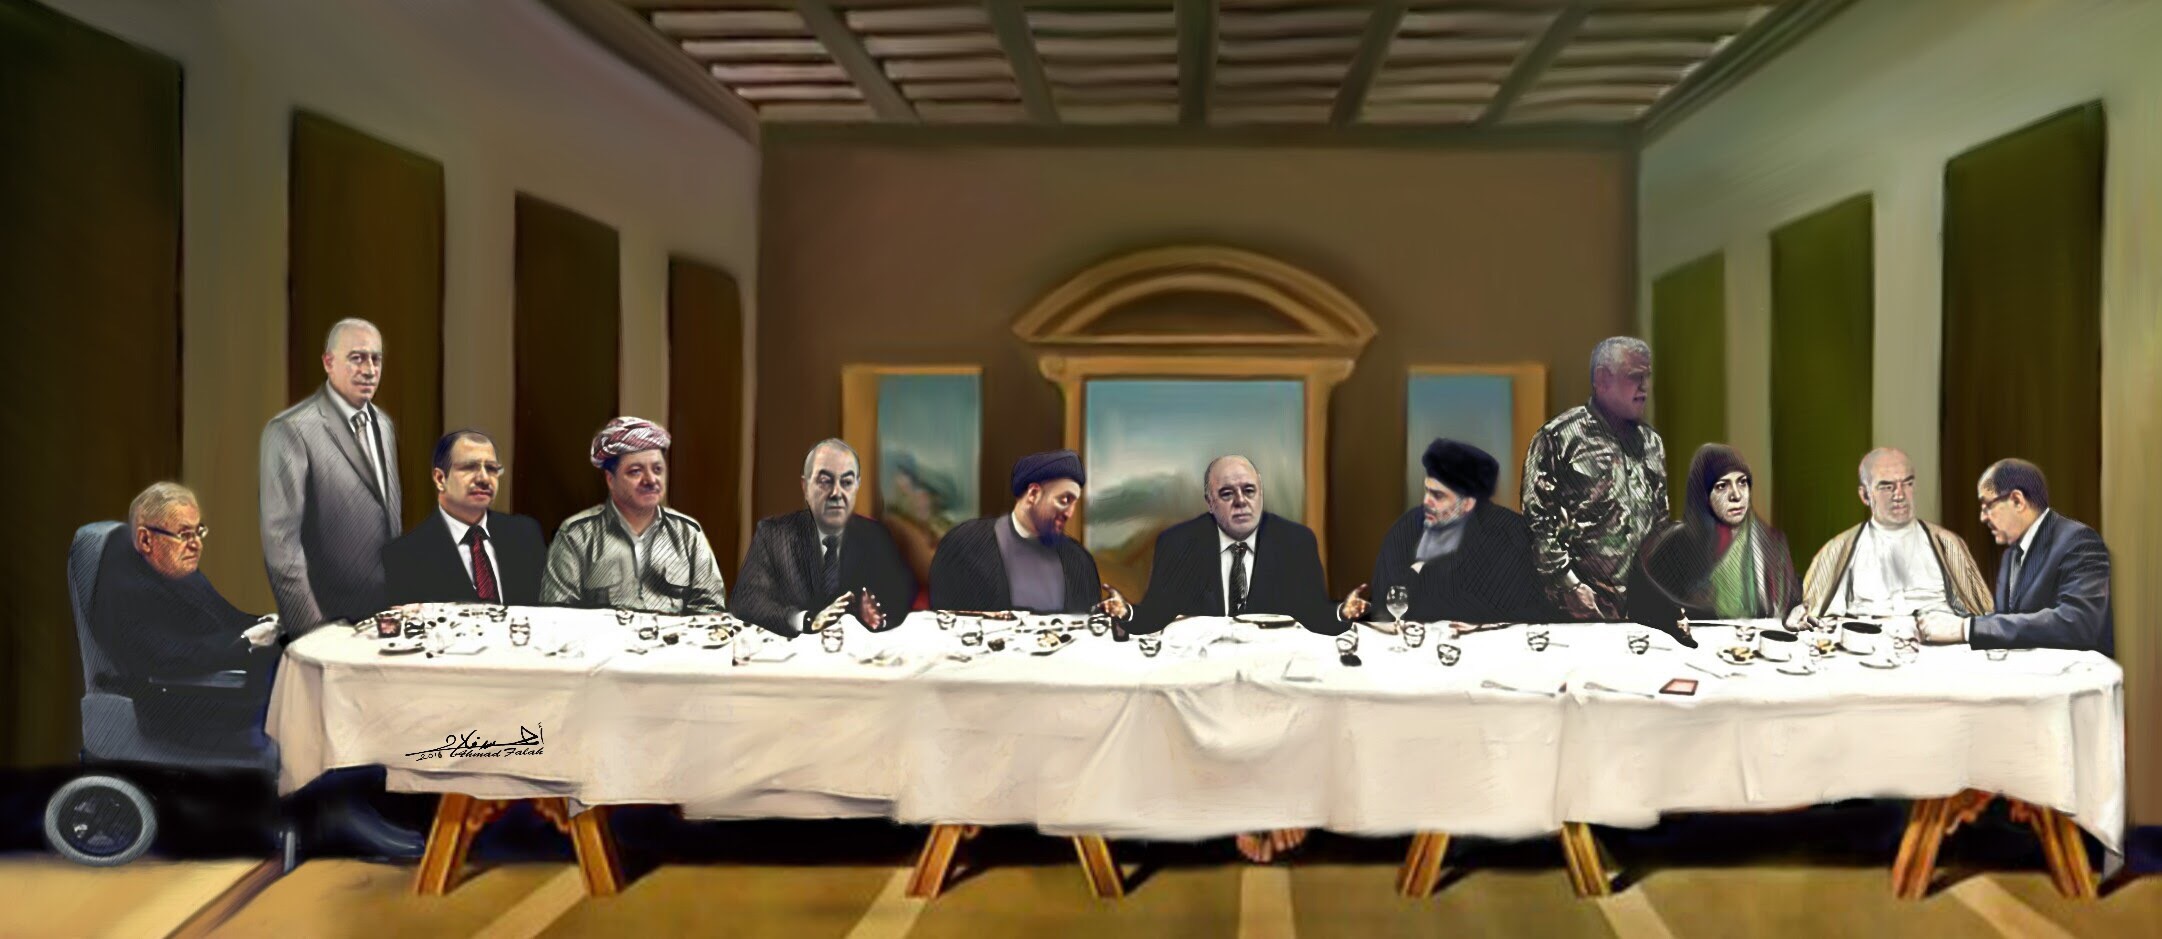 Ahmed Falah's parody of Leonardo da Vinci’s The Last Supper, Falah posted his work a day before Shia cleric Muqtada Al Sadr’s ultimatum to PM Haider Abadi and parliament session was over, suggesting that their meeting that night to reach a solution over the reforms could be their last one. Many Iraqi Christians reacted to this art piece and for a while caused facebook to suspend Falah's account. Photo.